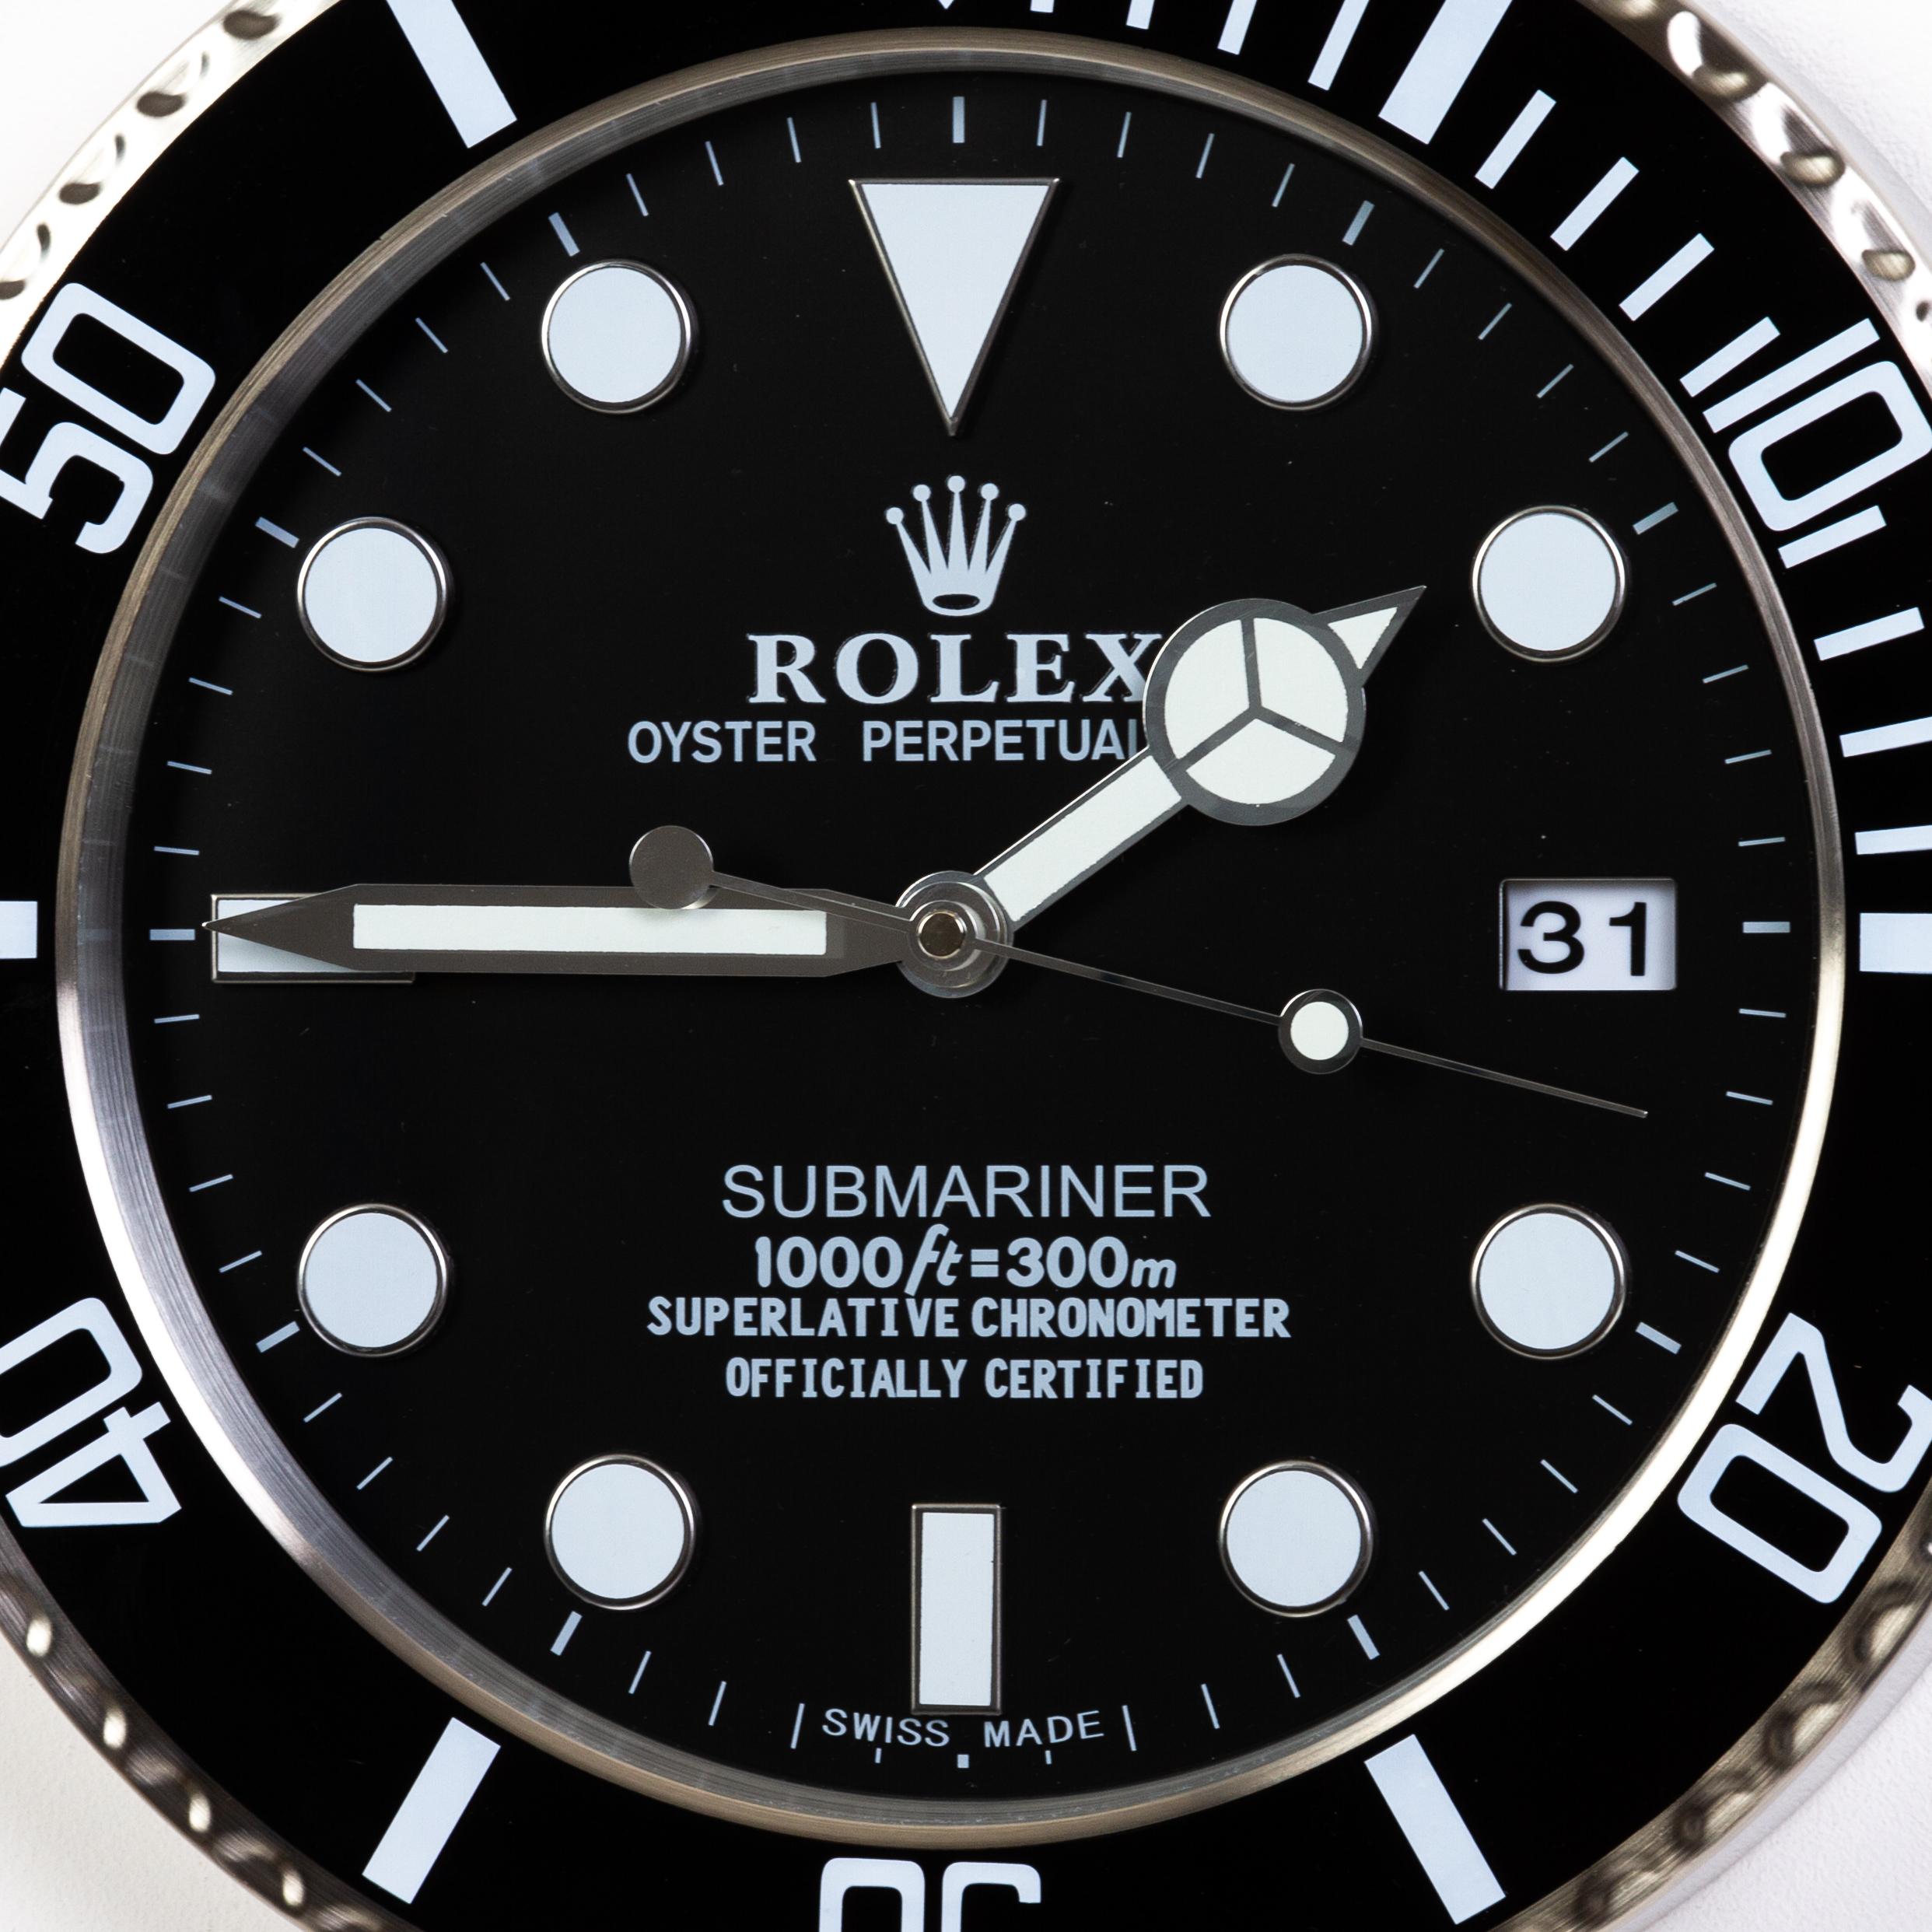 ROLEX Officially Certified Oyster Perpetual Submariner Wall Clock 
Good condition, working.
Free international shipping.